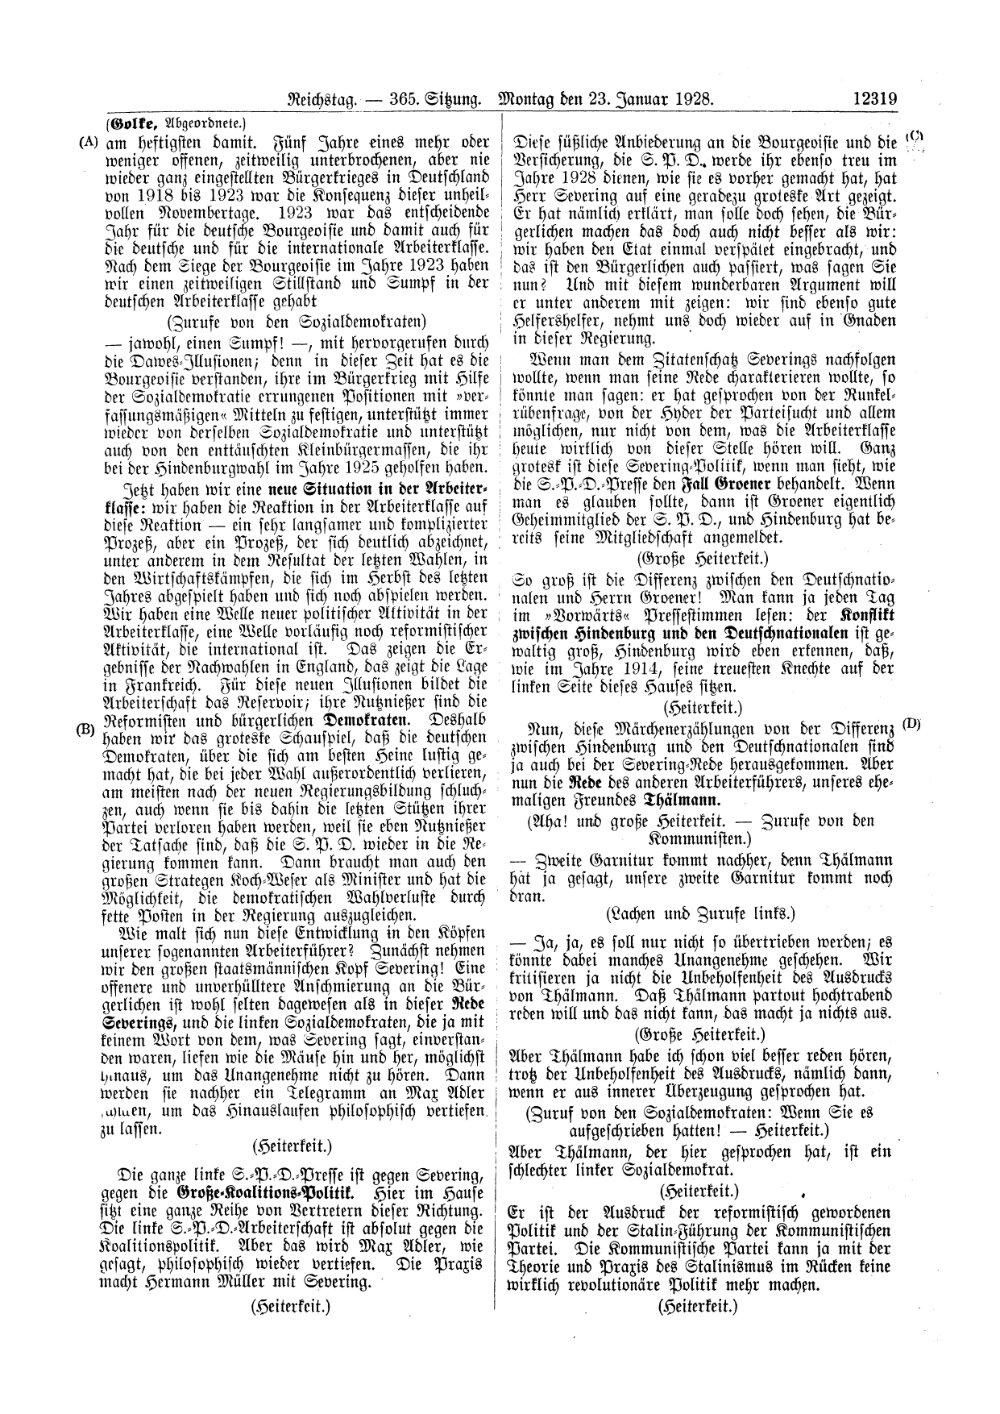 Scan of page 12319